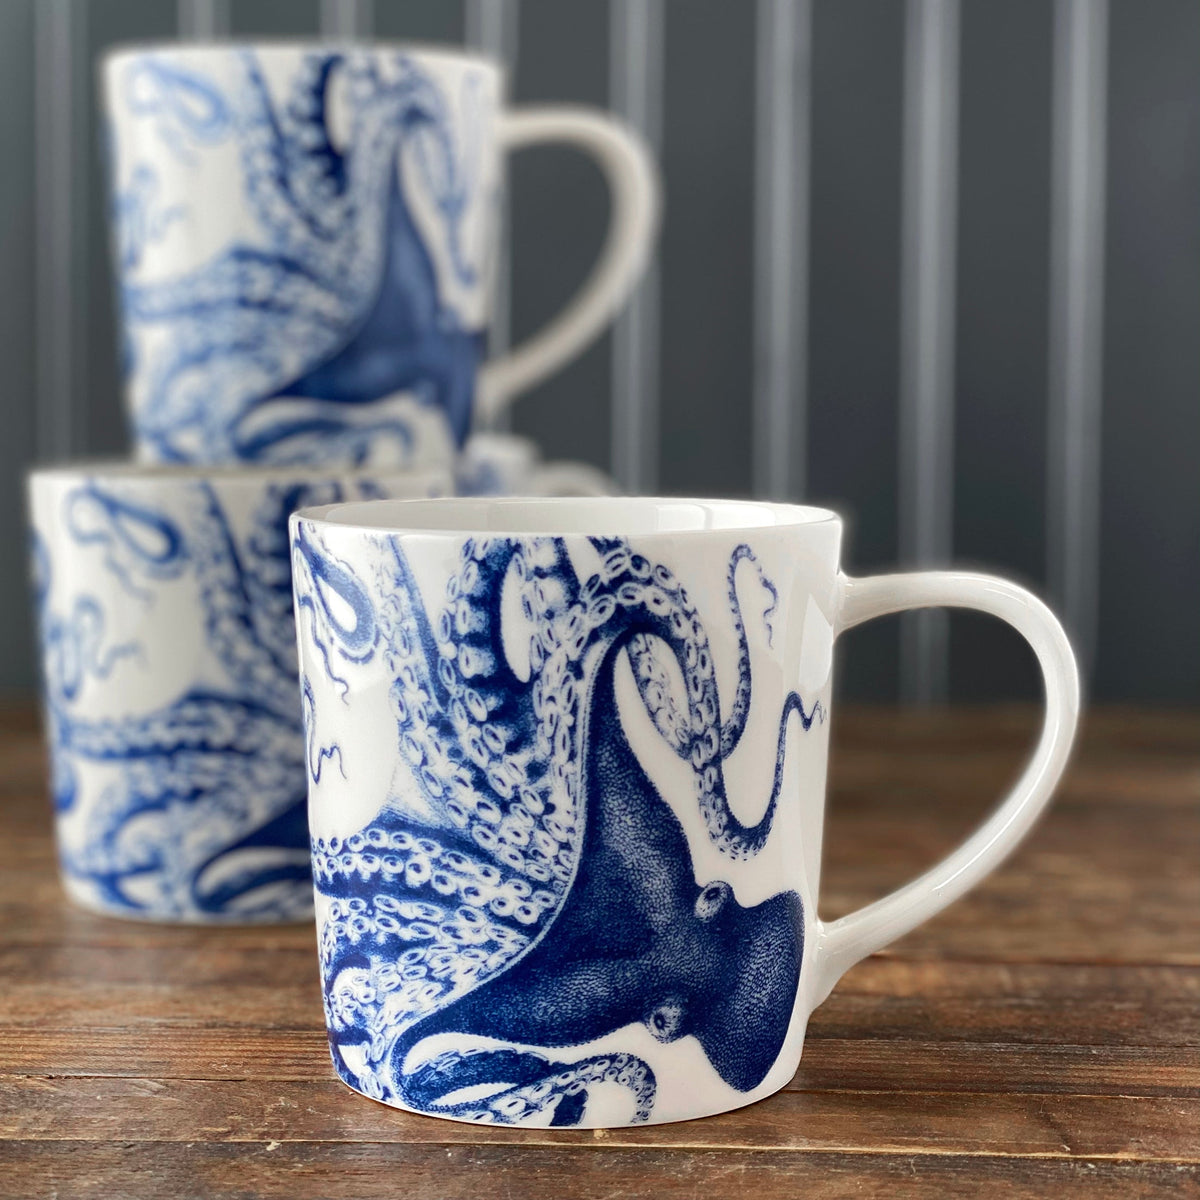 Three white Lucy Mugs by Caskata Artisanal Home with blue illustrations are stacked on a wooden surface, set against a blurred background. These dishwasher and microwave safe mugs add a touch of the ocean to your kitchen.